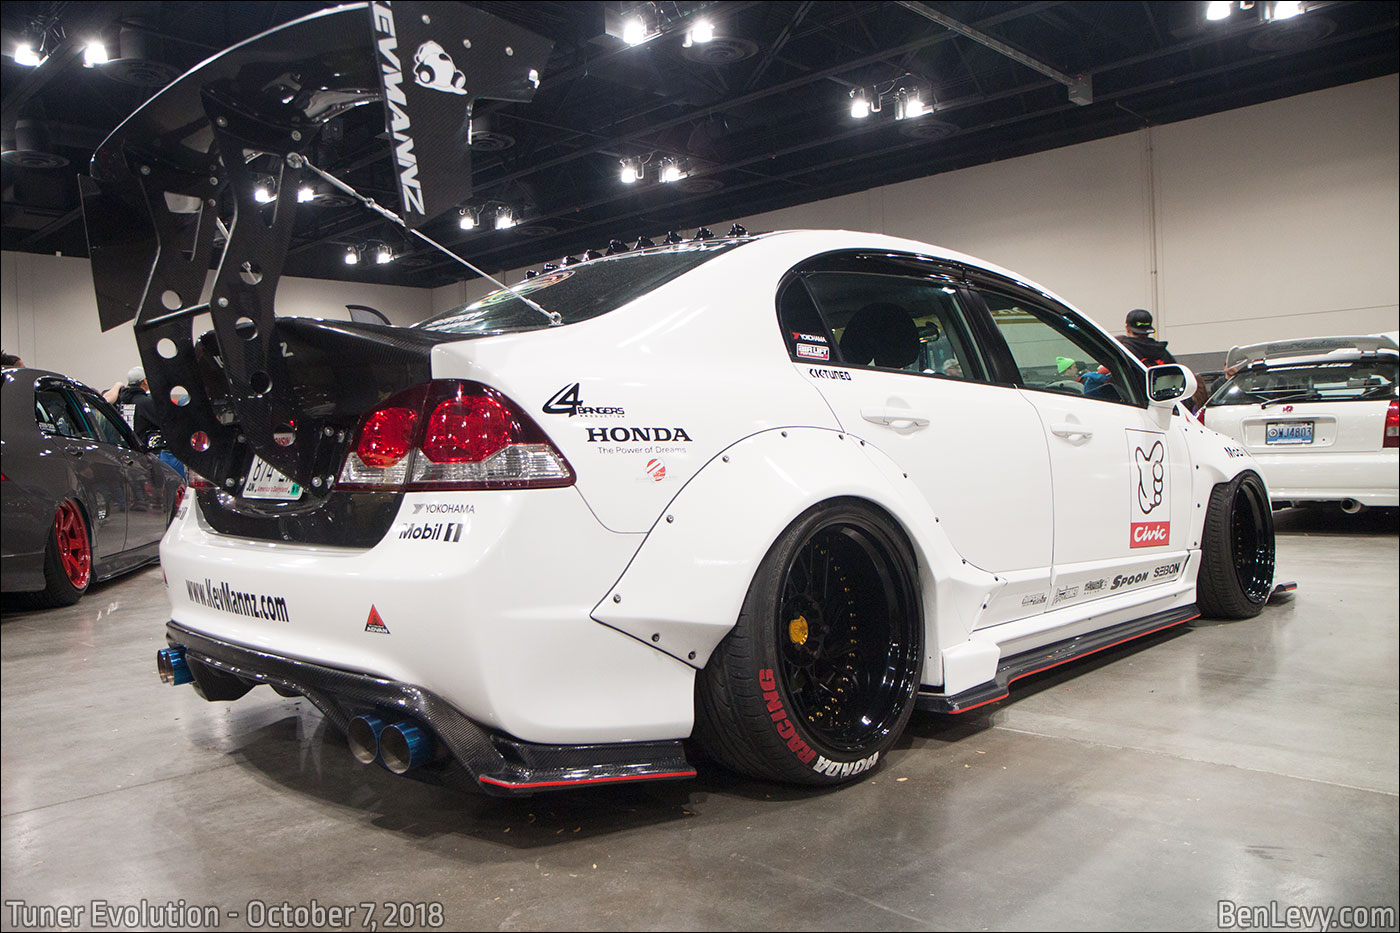 Honda Civic with JDM tails